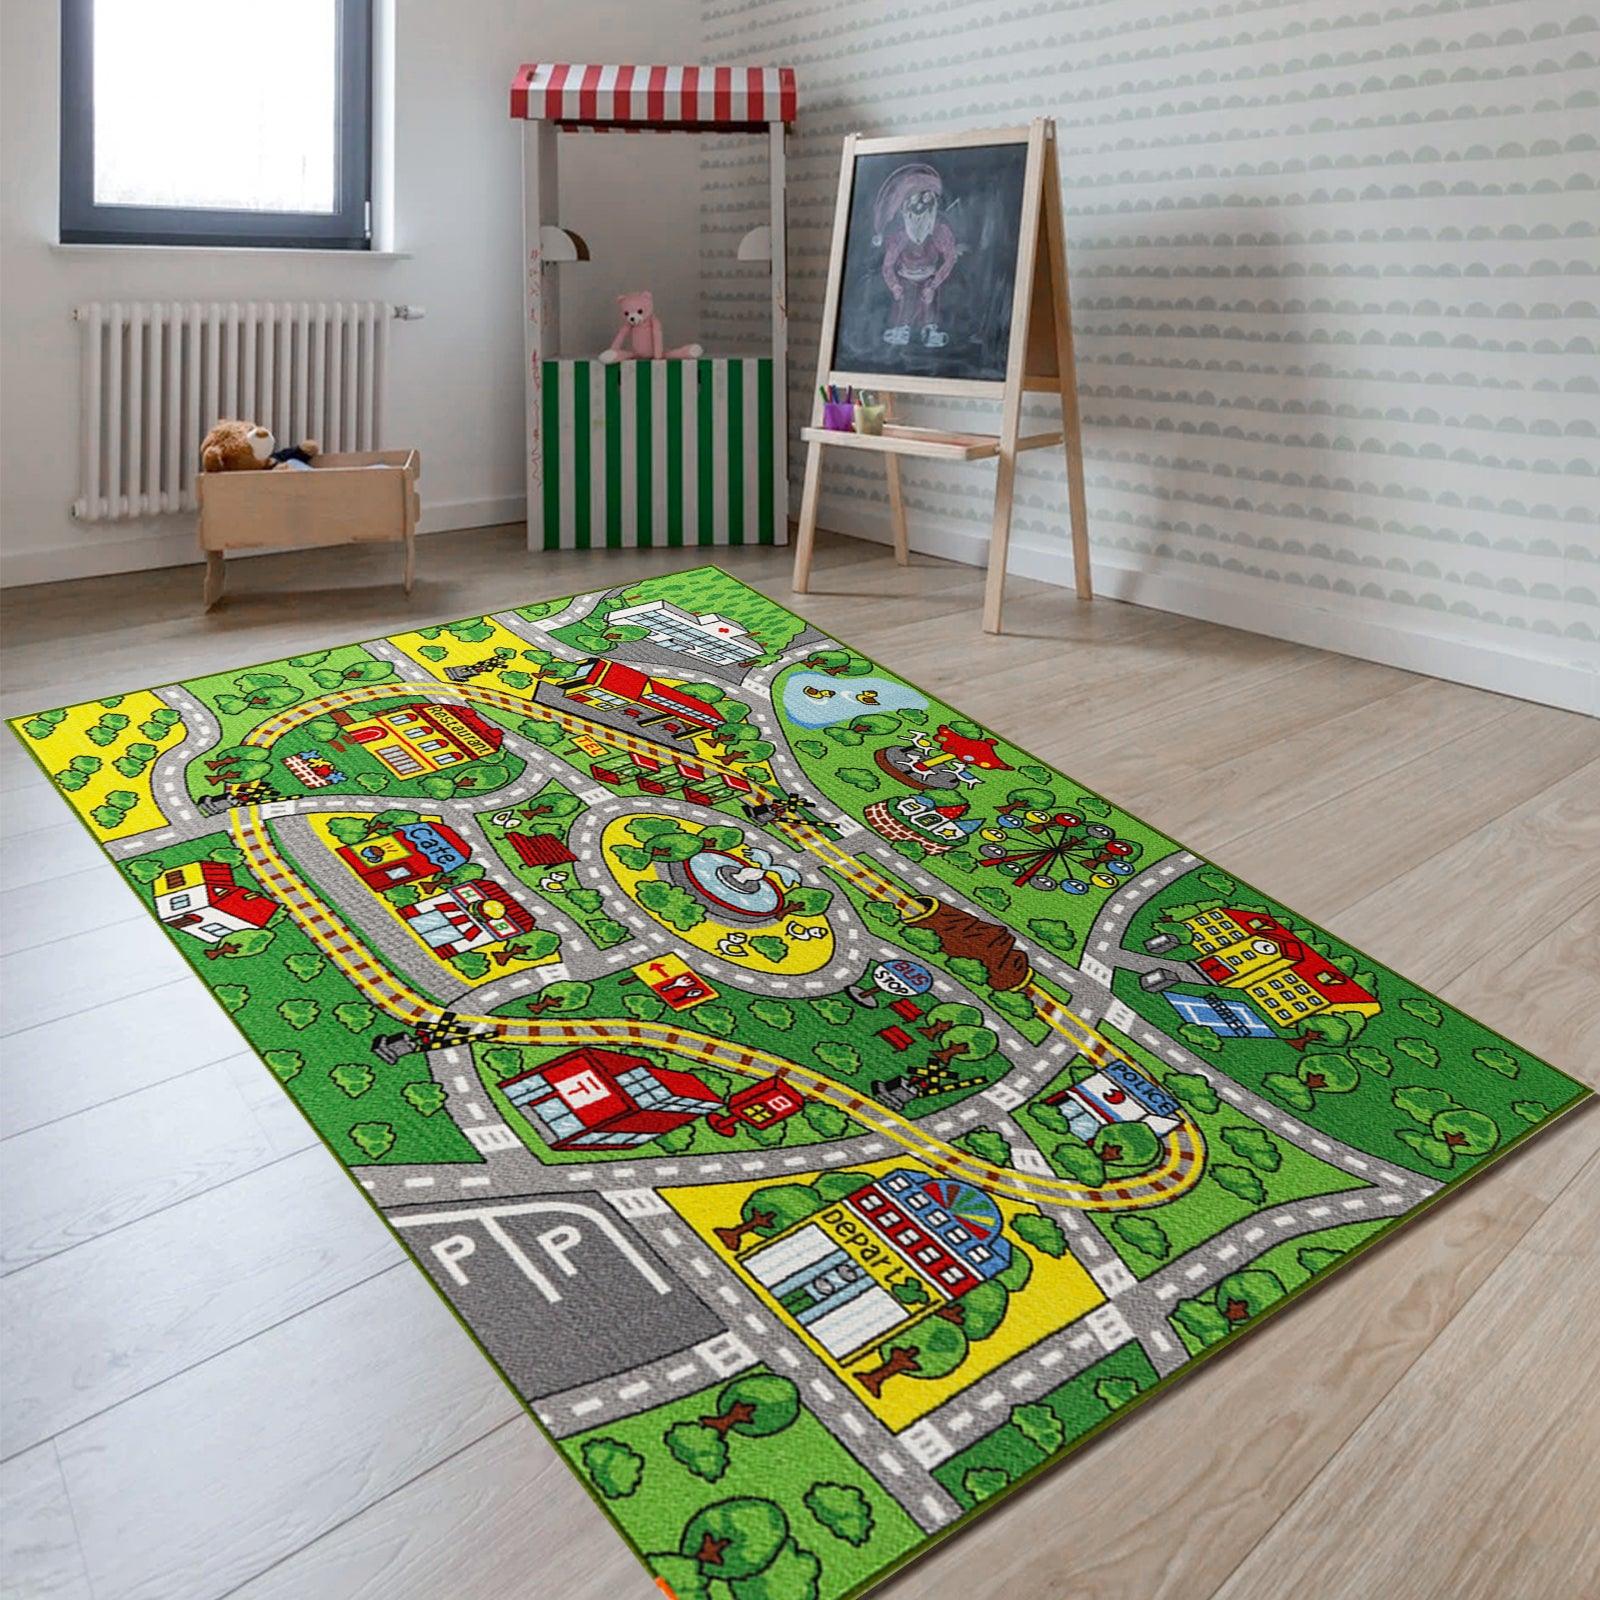 Jackson Kid Rug Carpet Playmat for Toy Cars and Train,Huge Large 52"x 74" Play Area Rug with Rubber Backing,Kids Race Track Rug for Toddlers,Baby,and Children Playing and Learning 11